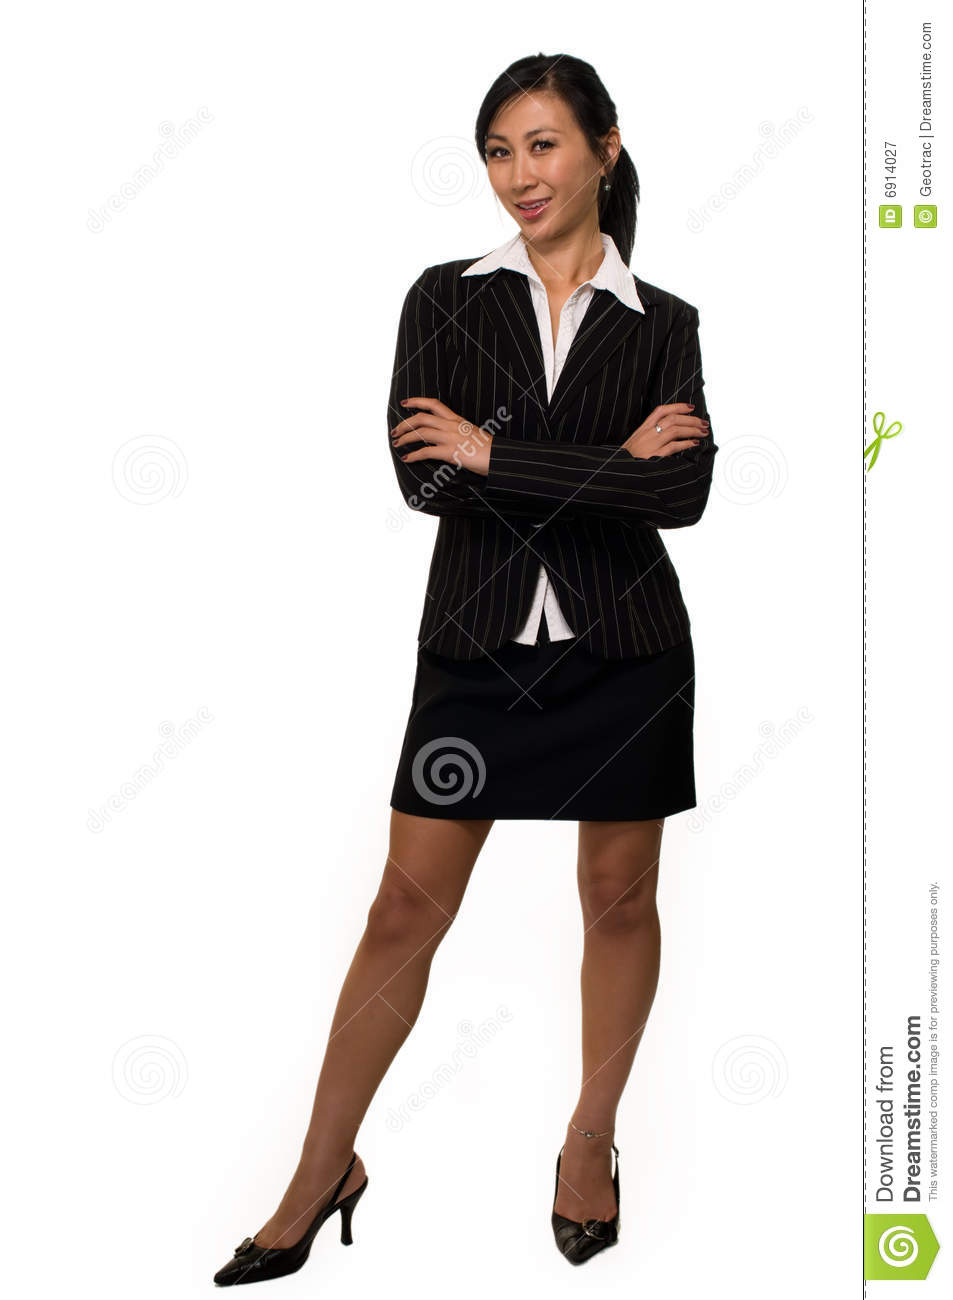 Woman Wearing Black Business Suit With Skirt Standing On White With